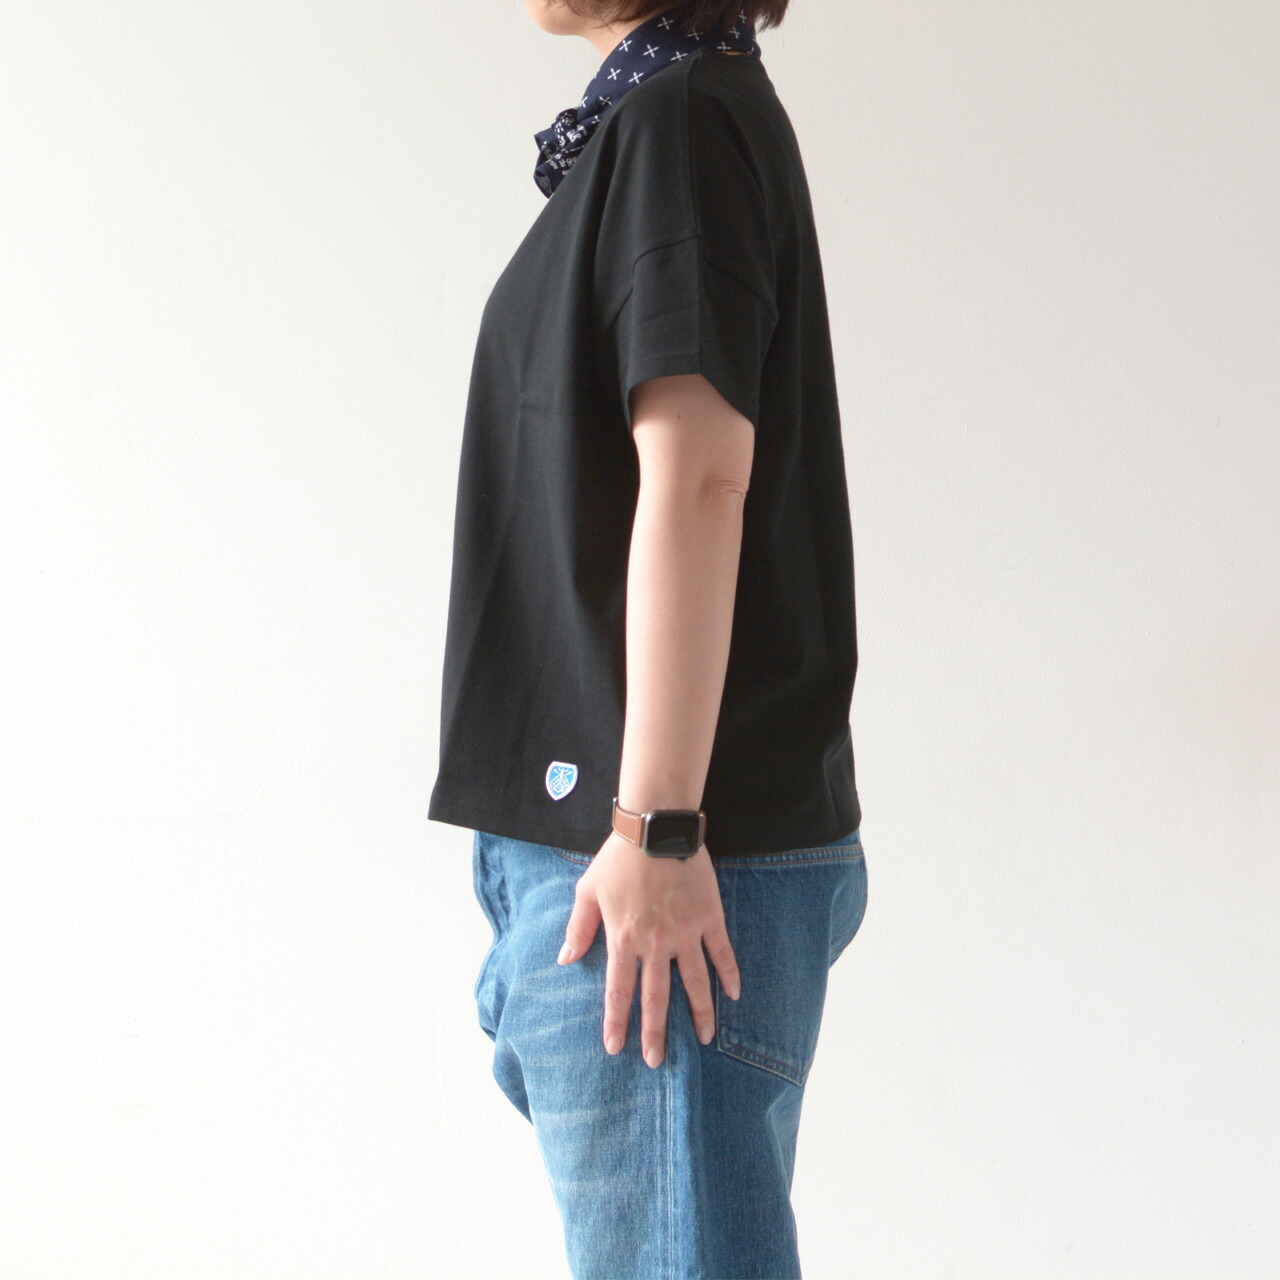 ORCIVAL [オーチバル・オーシバル] 40/2 JERSEY BOAT NECK S/S WIDE TEE SOLID [RC-9255]_f0051306_05330648.jpg